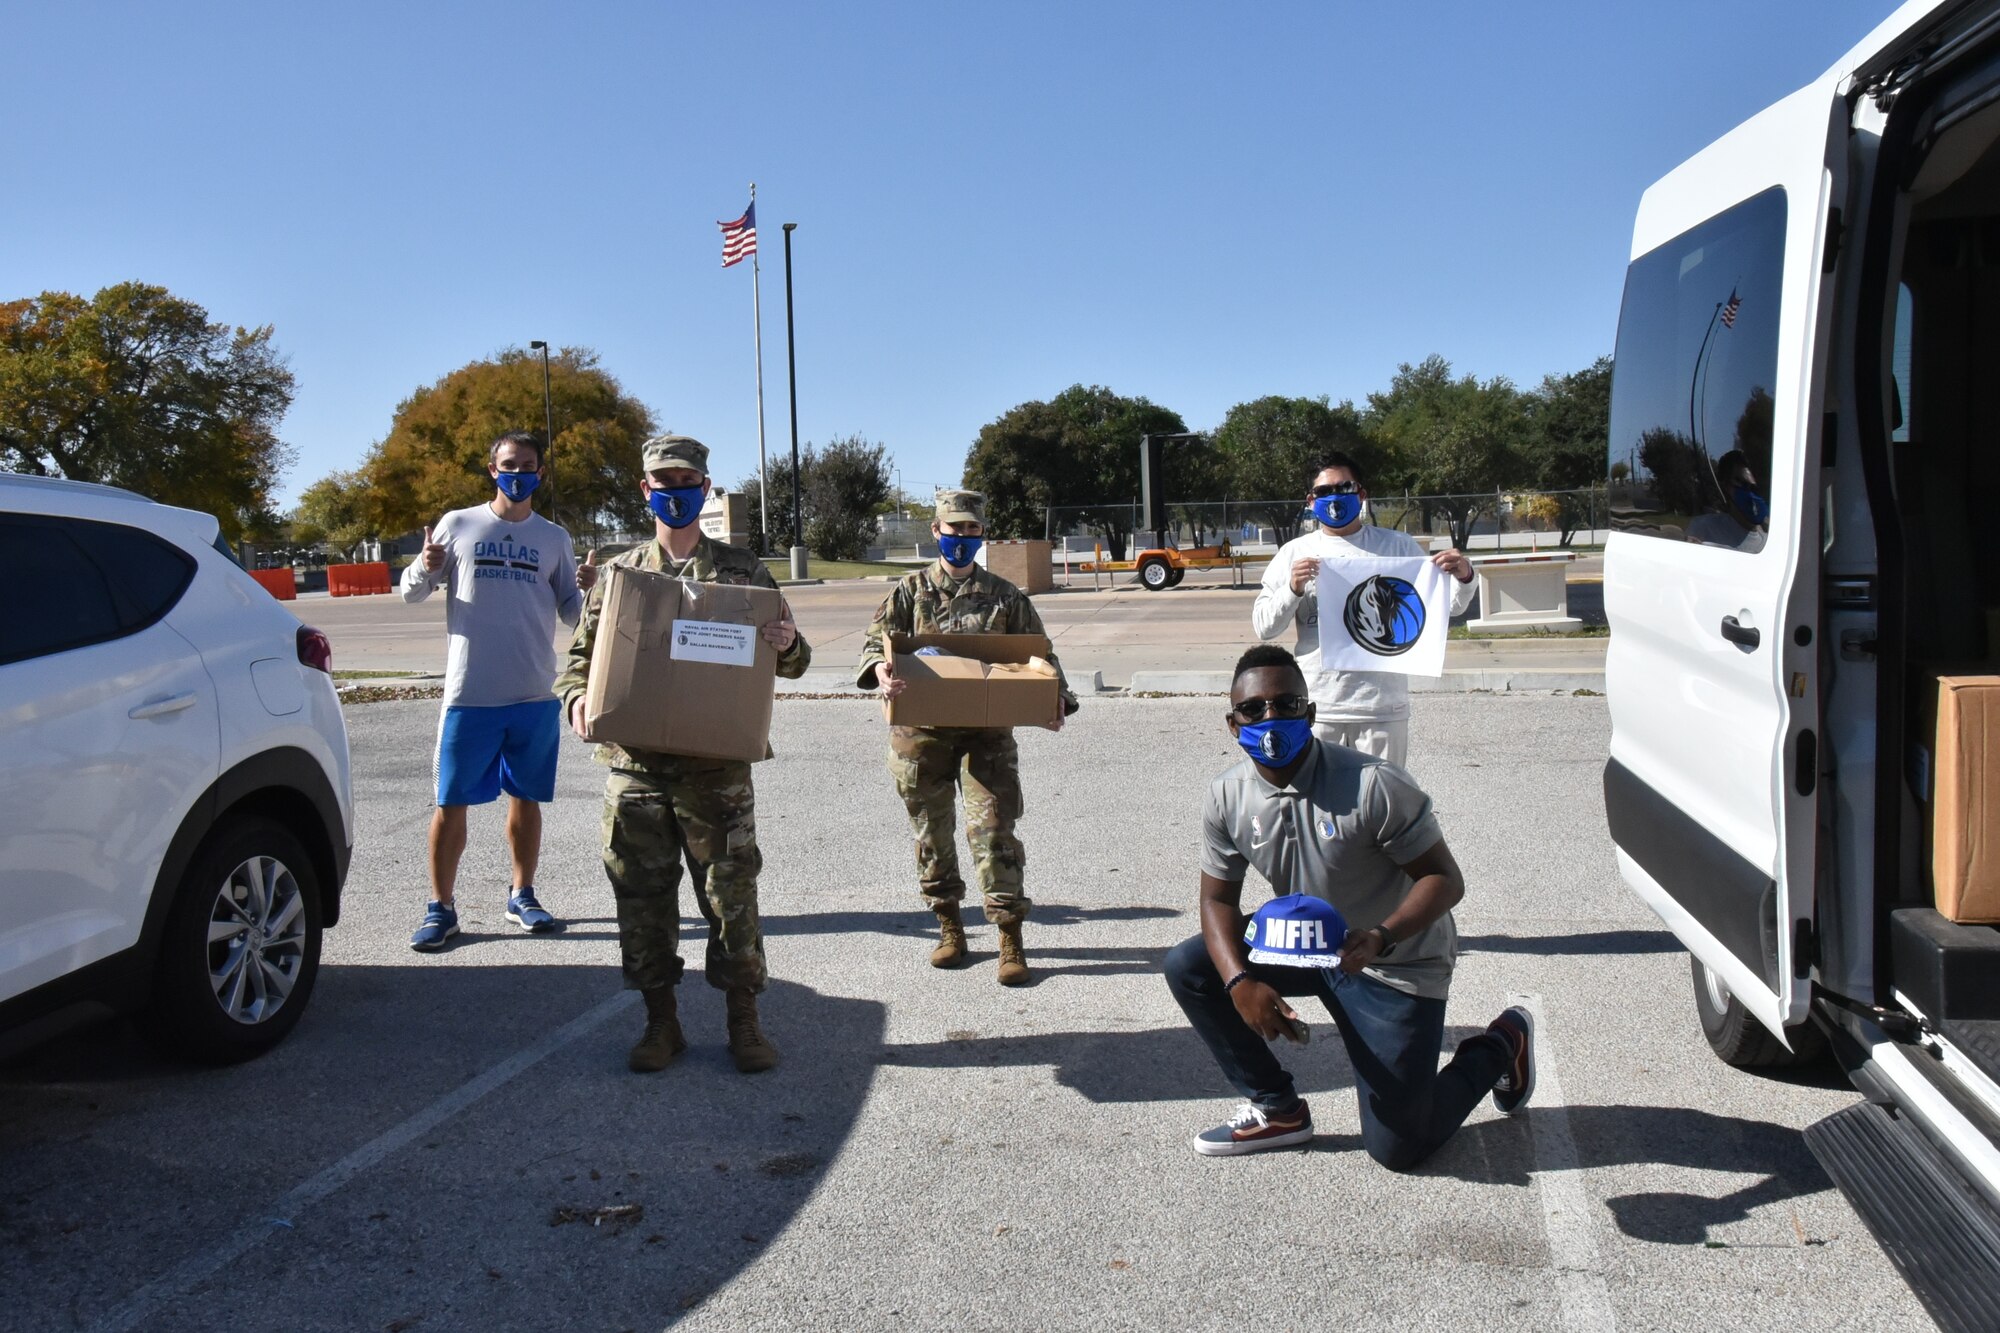 (Lower right) Cory Carter and fellow Dallas Mavericks community relations staff members distribute boxes of donated Mavs swag to 301st Fighter Wing Public Affairs members, Public Affairs Officer, Captain Jessica Gross and Senior Airman William Downs at U.S. Naval Air Station Joint Reserve Base Fort Worth, Texas on November 10, 2020. Due to COVID-19 health considerations, this year's event was held in lieu of the annual Hoops for Troops event. (U.S. Air Force photo by Master Sgt. Jeremy Roman)